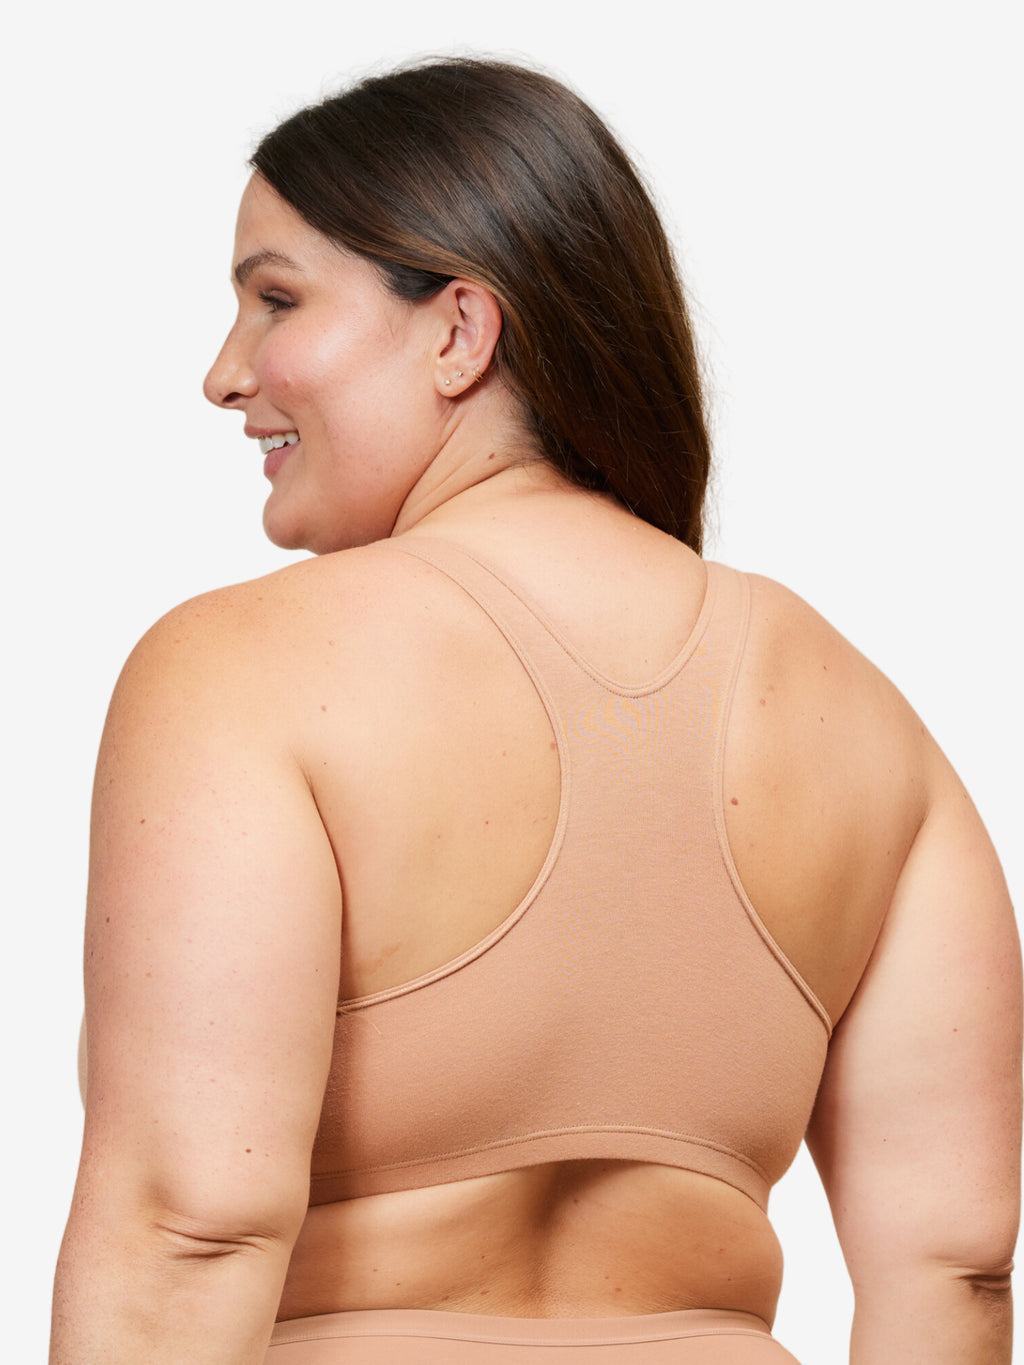 BRAS – Tagged BAMBOO – Serena's Ladies Wear